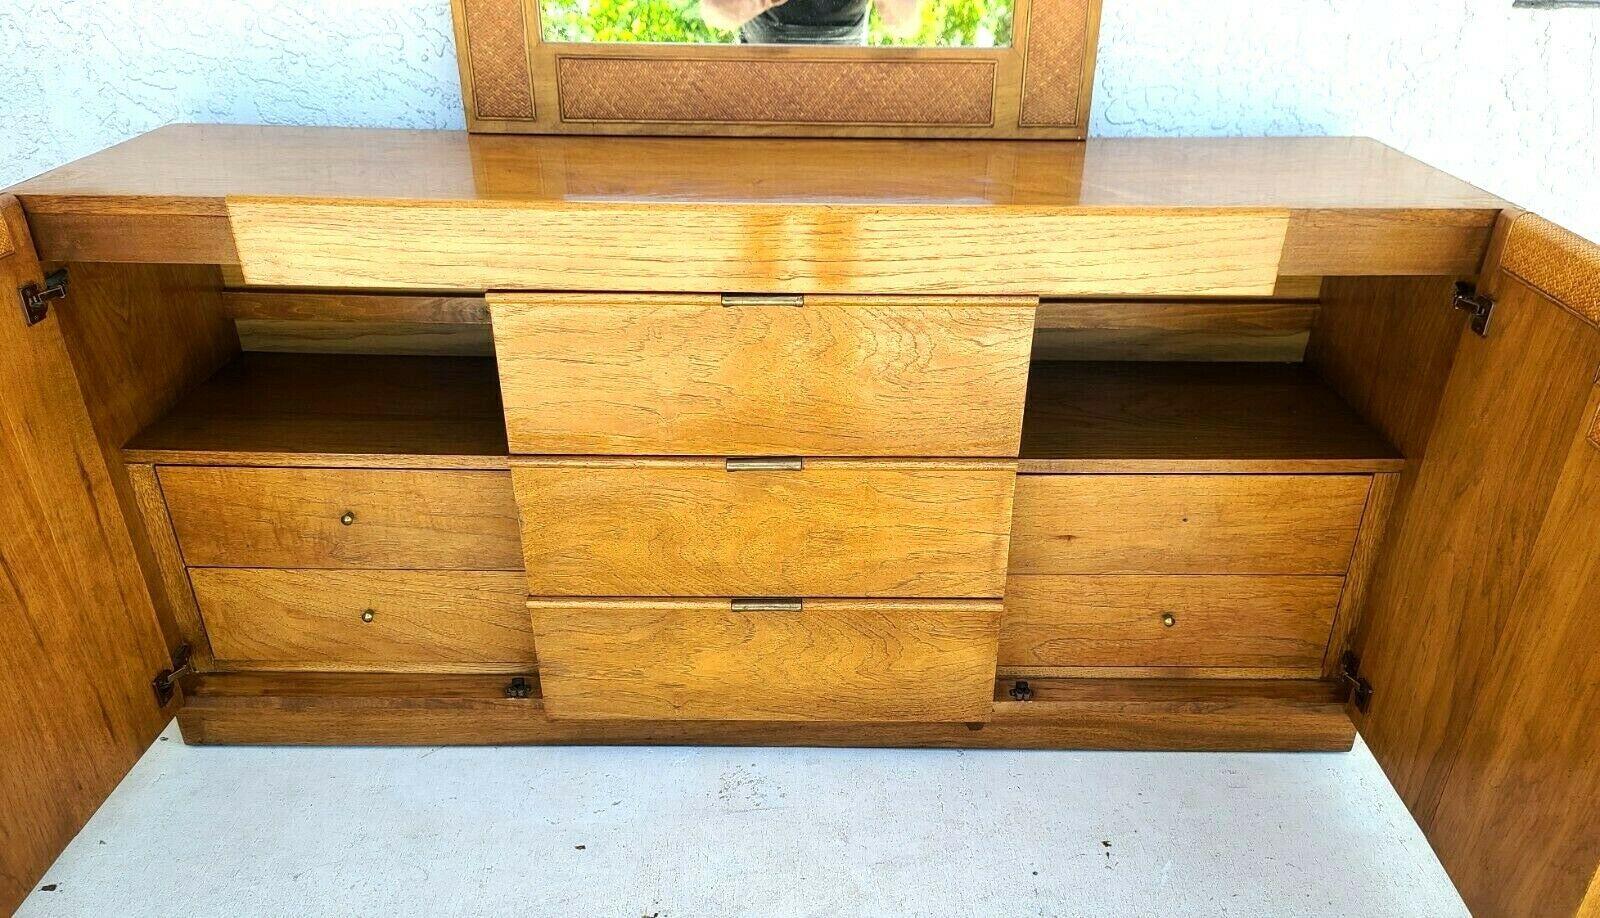 For FULL item description click on CONTINUE READING at the bottom of this page.

Offering One Of Our Recent Palm Beach Estate Fine Furniture Acquisitions Of A
Founders Mid-Century Modern Campaign Style Dresser or Credenza with Wicker Front Doors